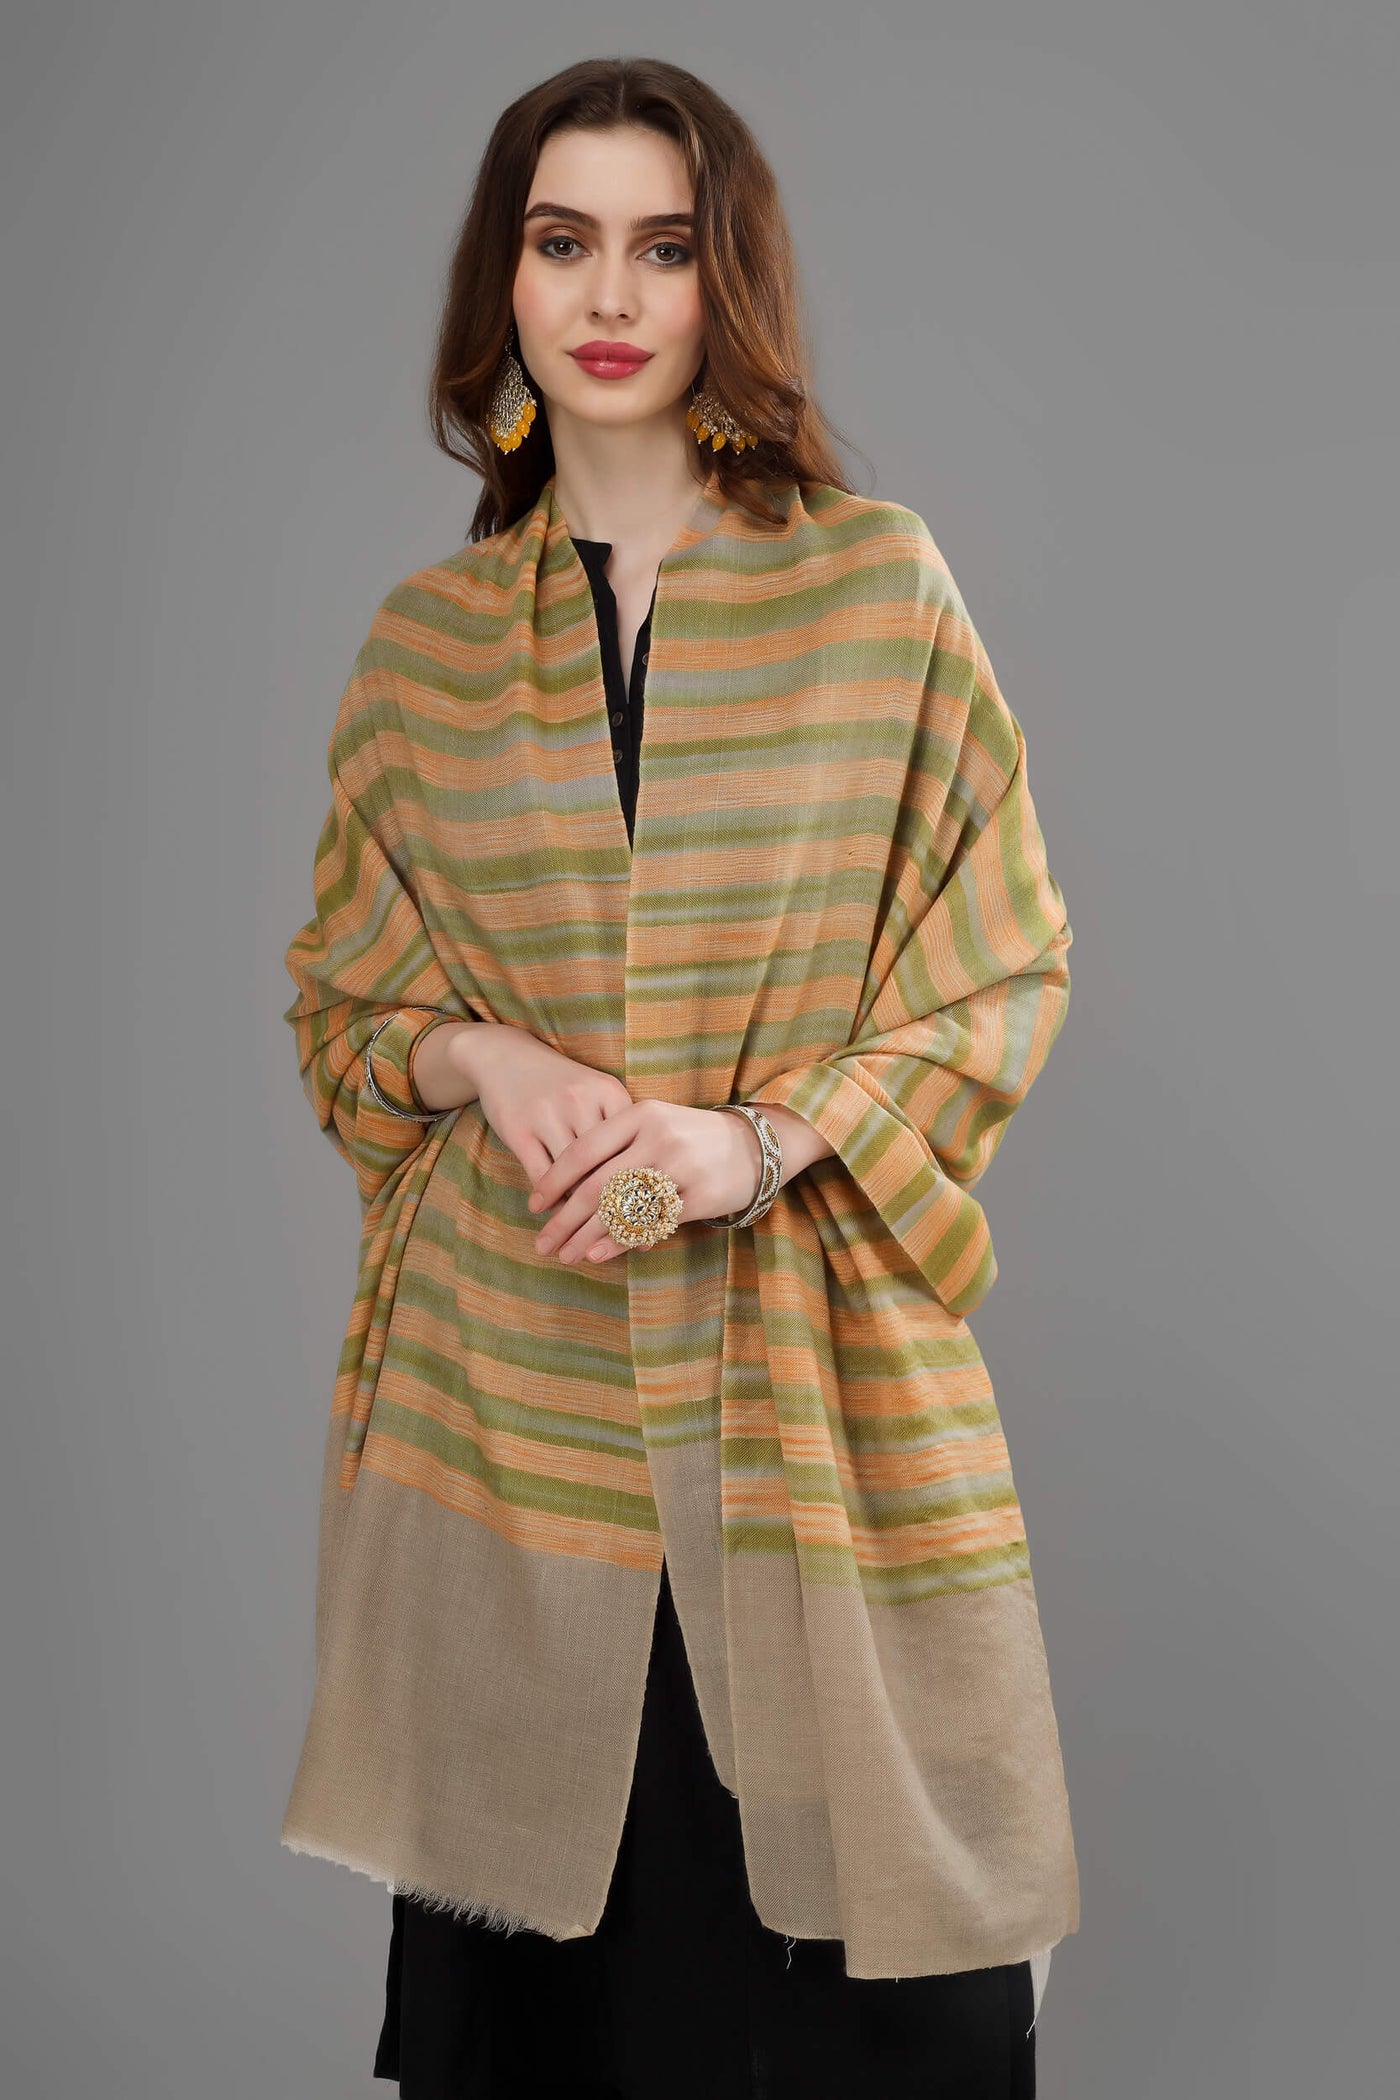 The handmade Kashmiri pashmina shawl, which is a favorite choice for bridal wear and is made of pure cashmere wool with stripes in yellow and green, is a luxurious winter accessory ideal for adding elegance to any outfit thanks to its colorful design.